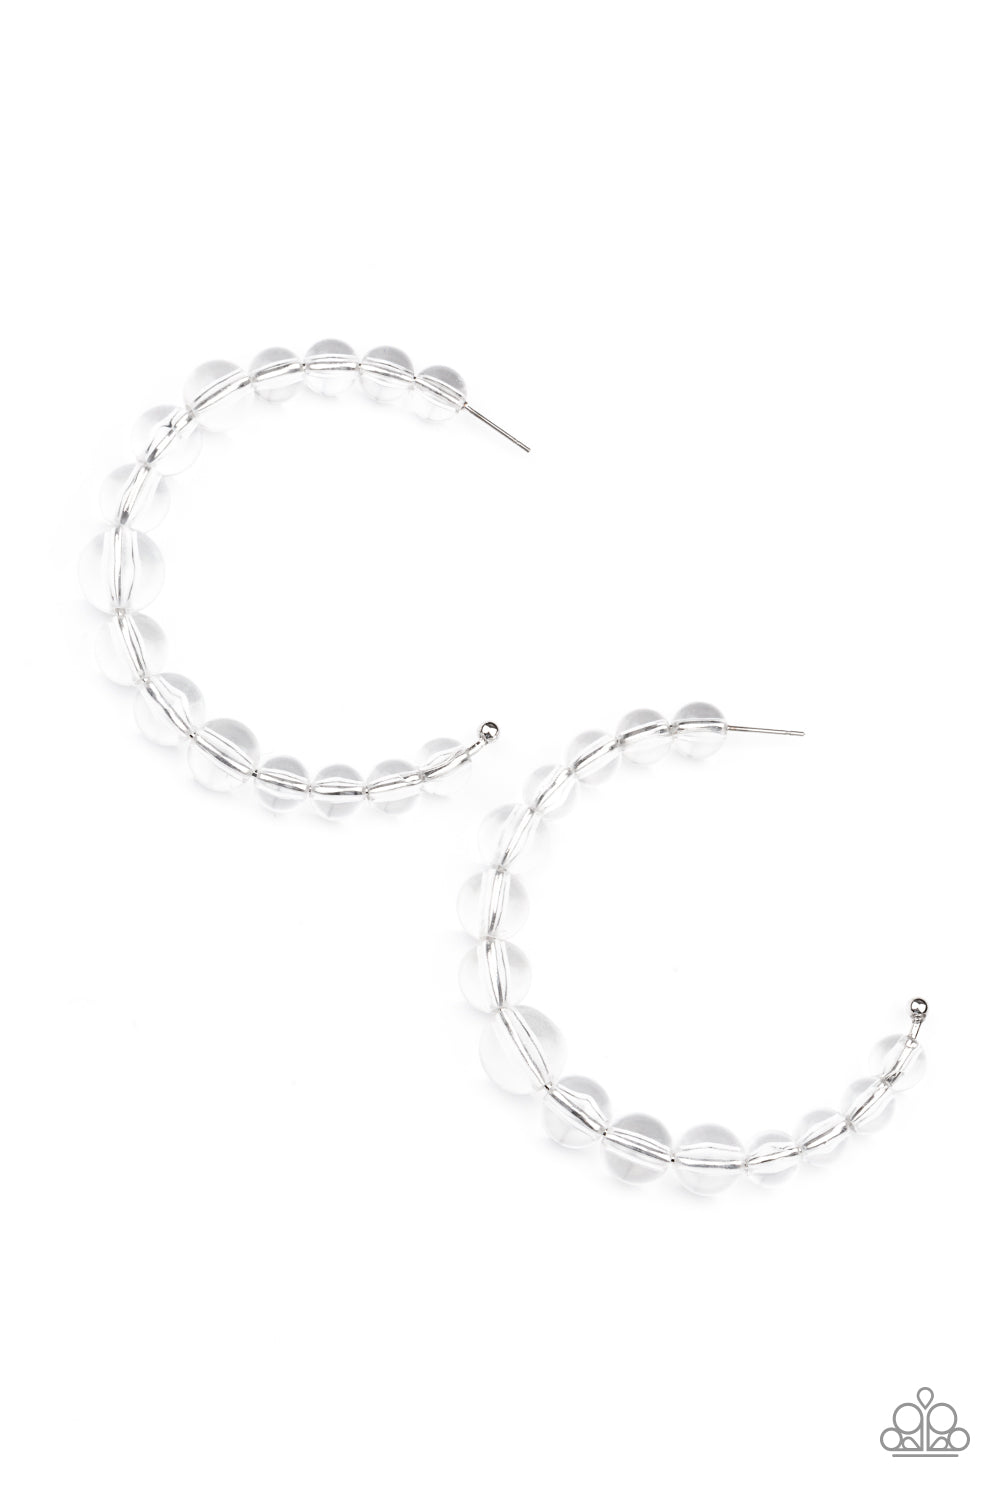 a glassy collection of white beads are threaded along an oversized hoop 